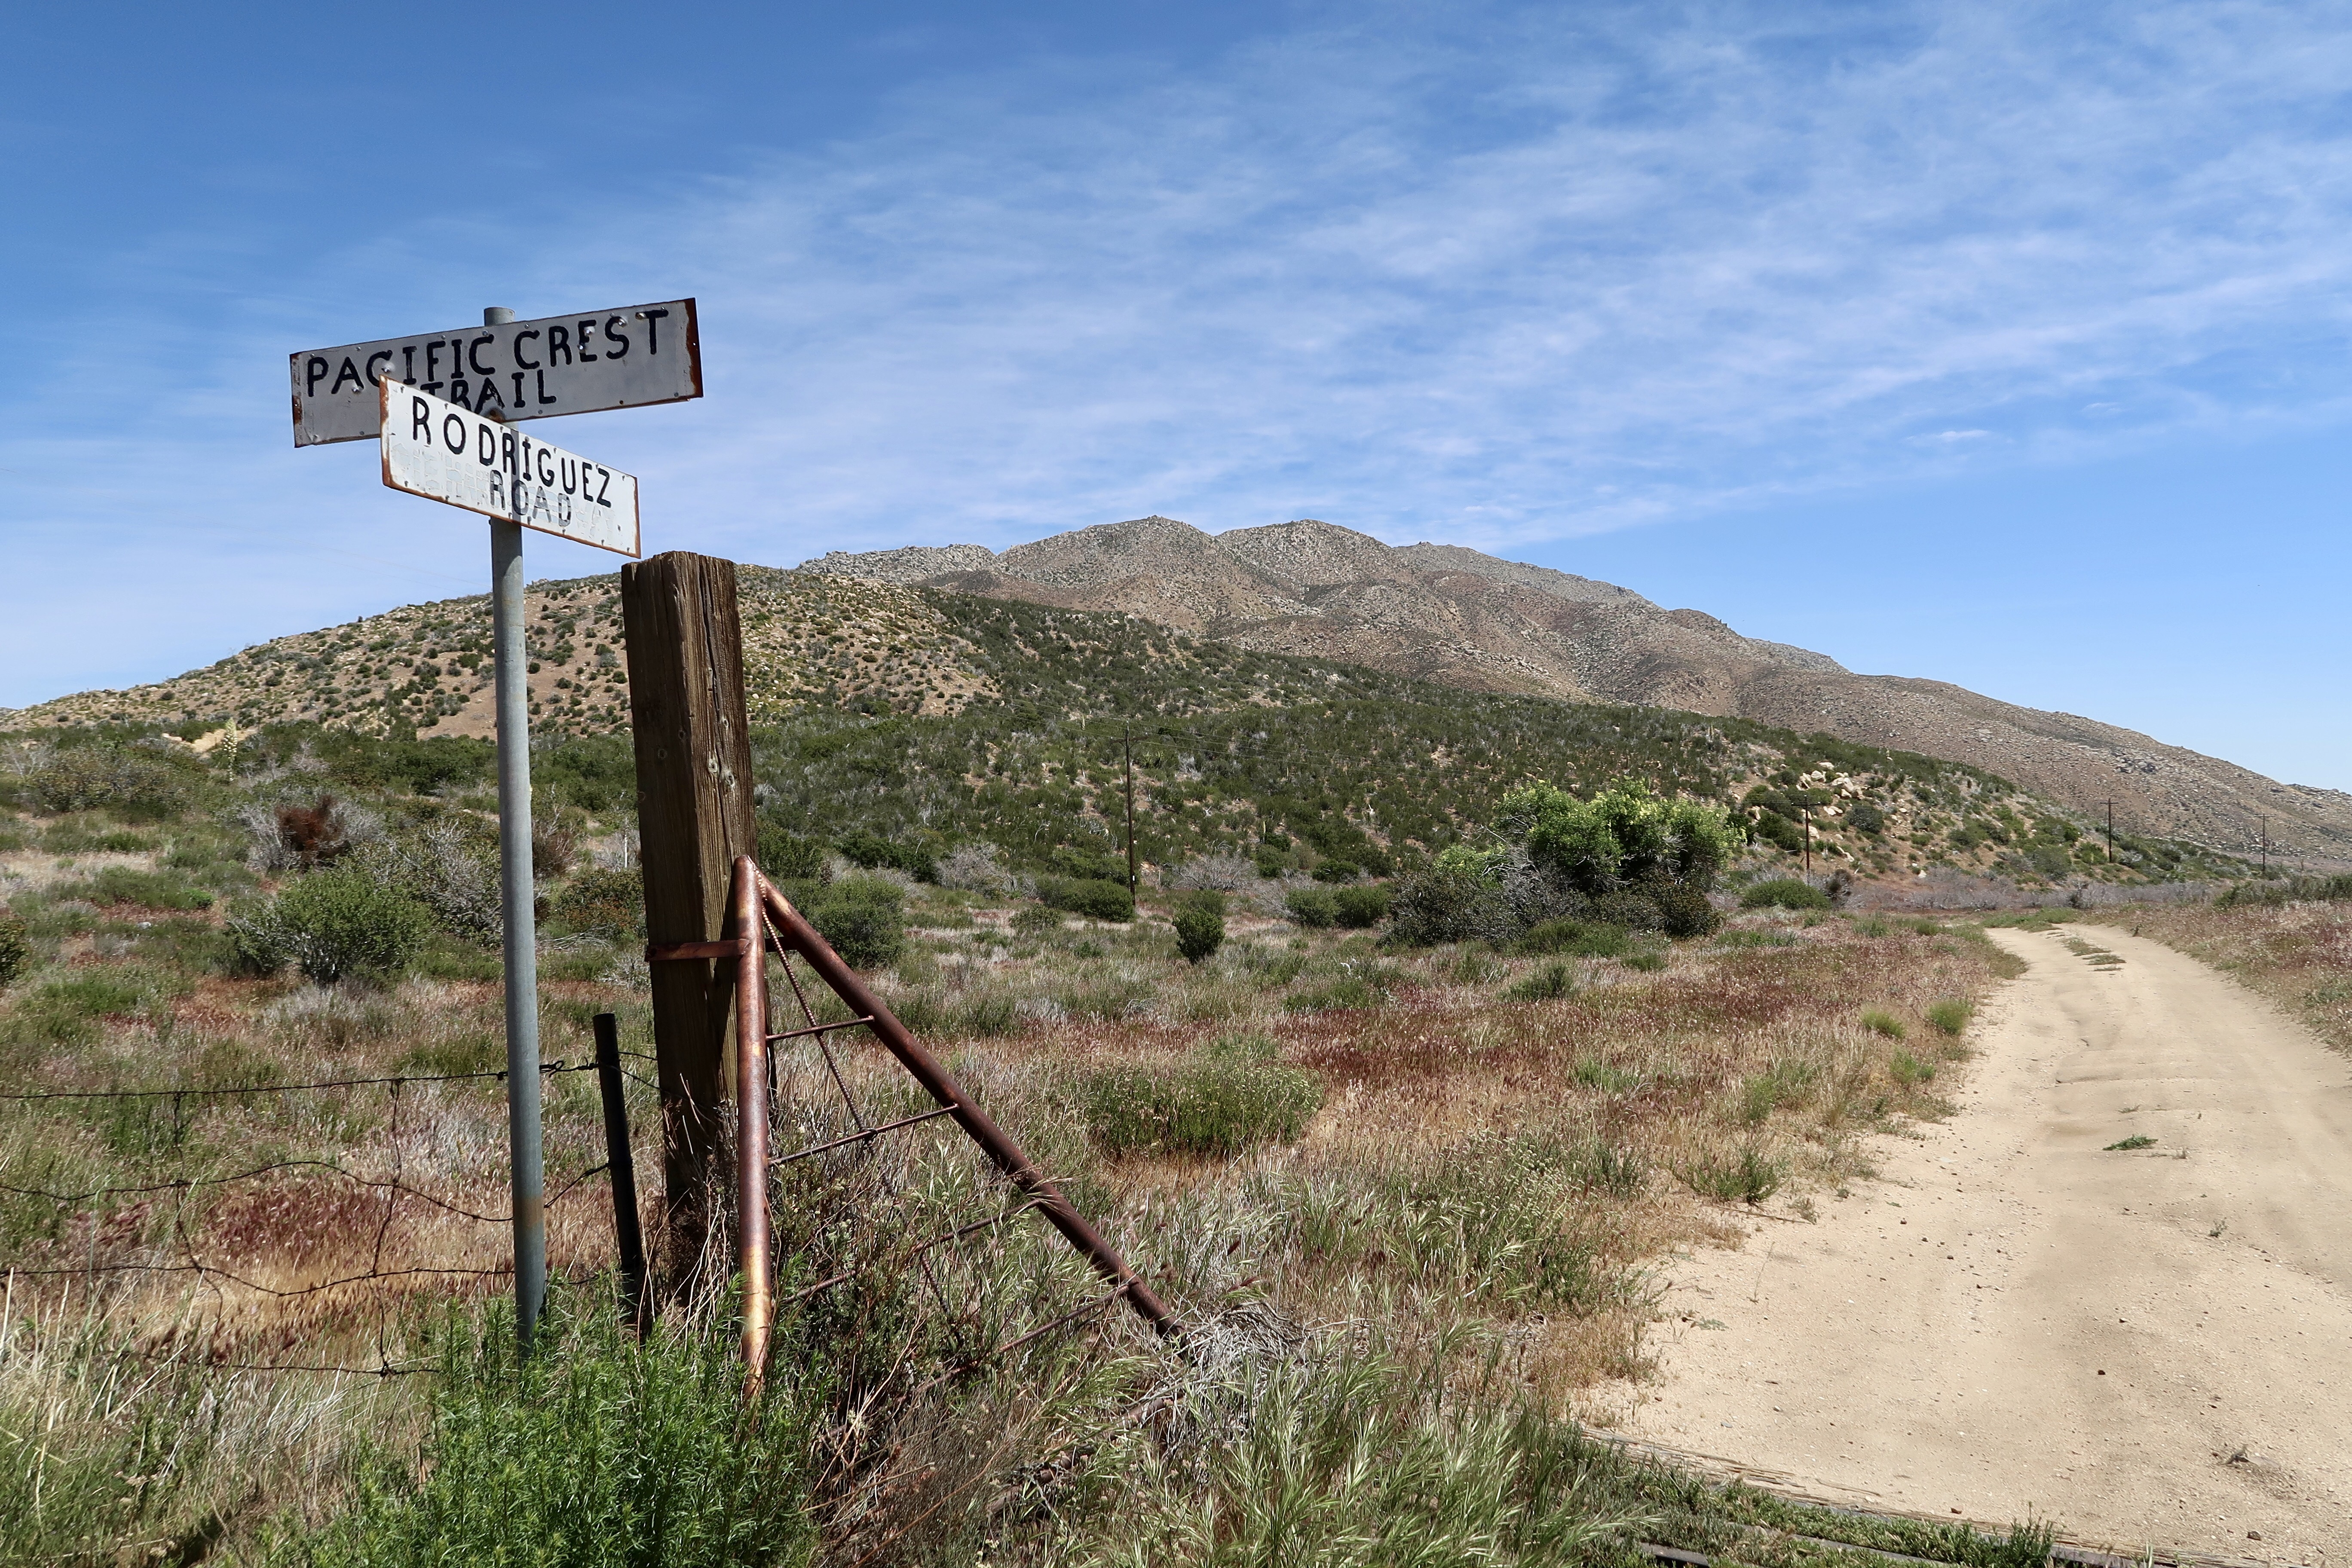 Pacific Crest Trail Day 6 – Hitching to Julian from Scissors Crossing